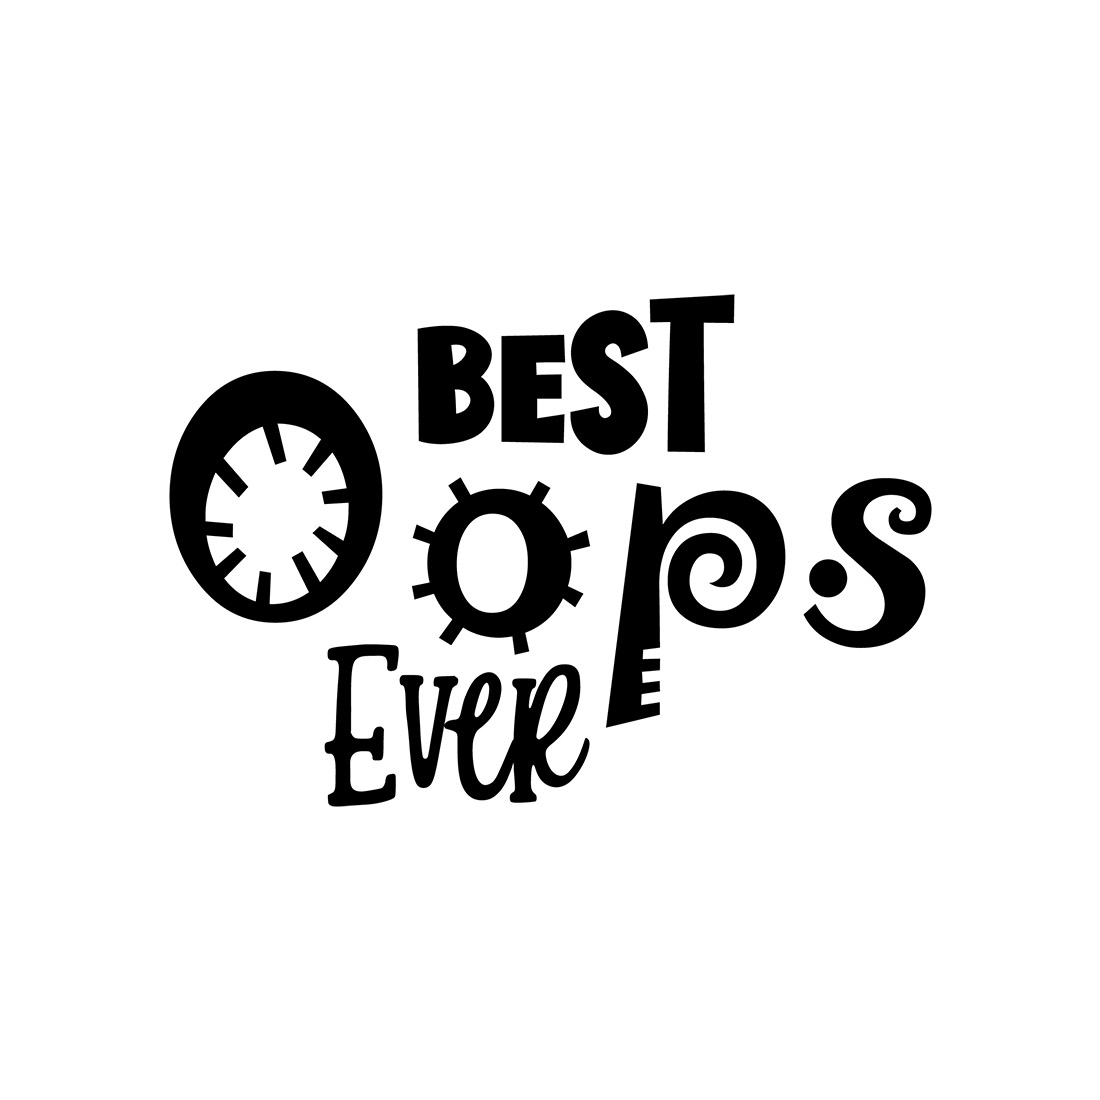 Image with enchanting black lettering for Best Oops Ever prints.